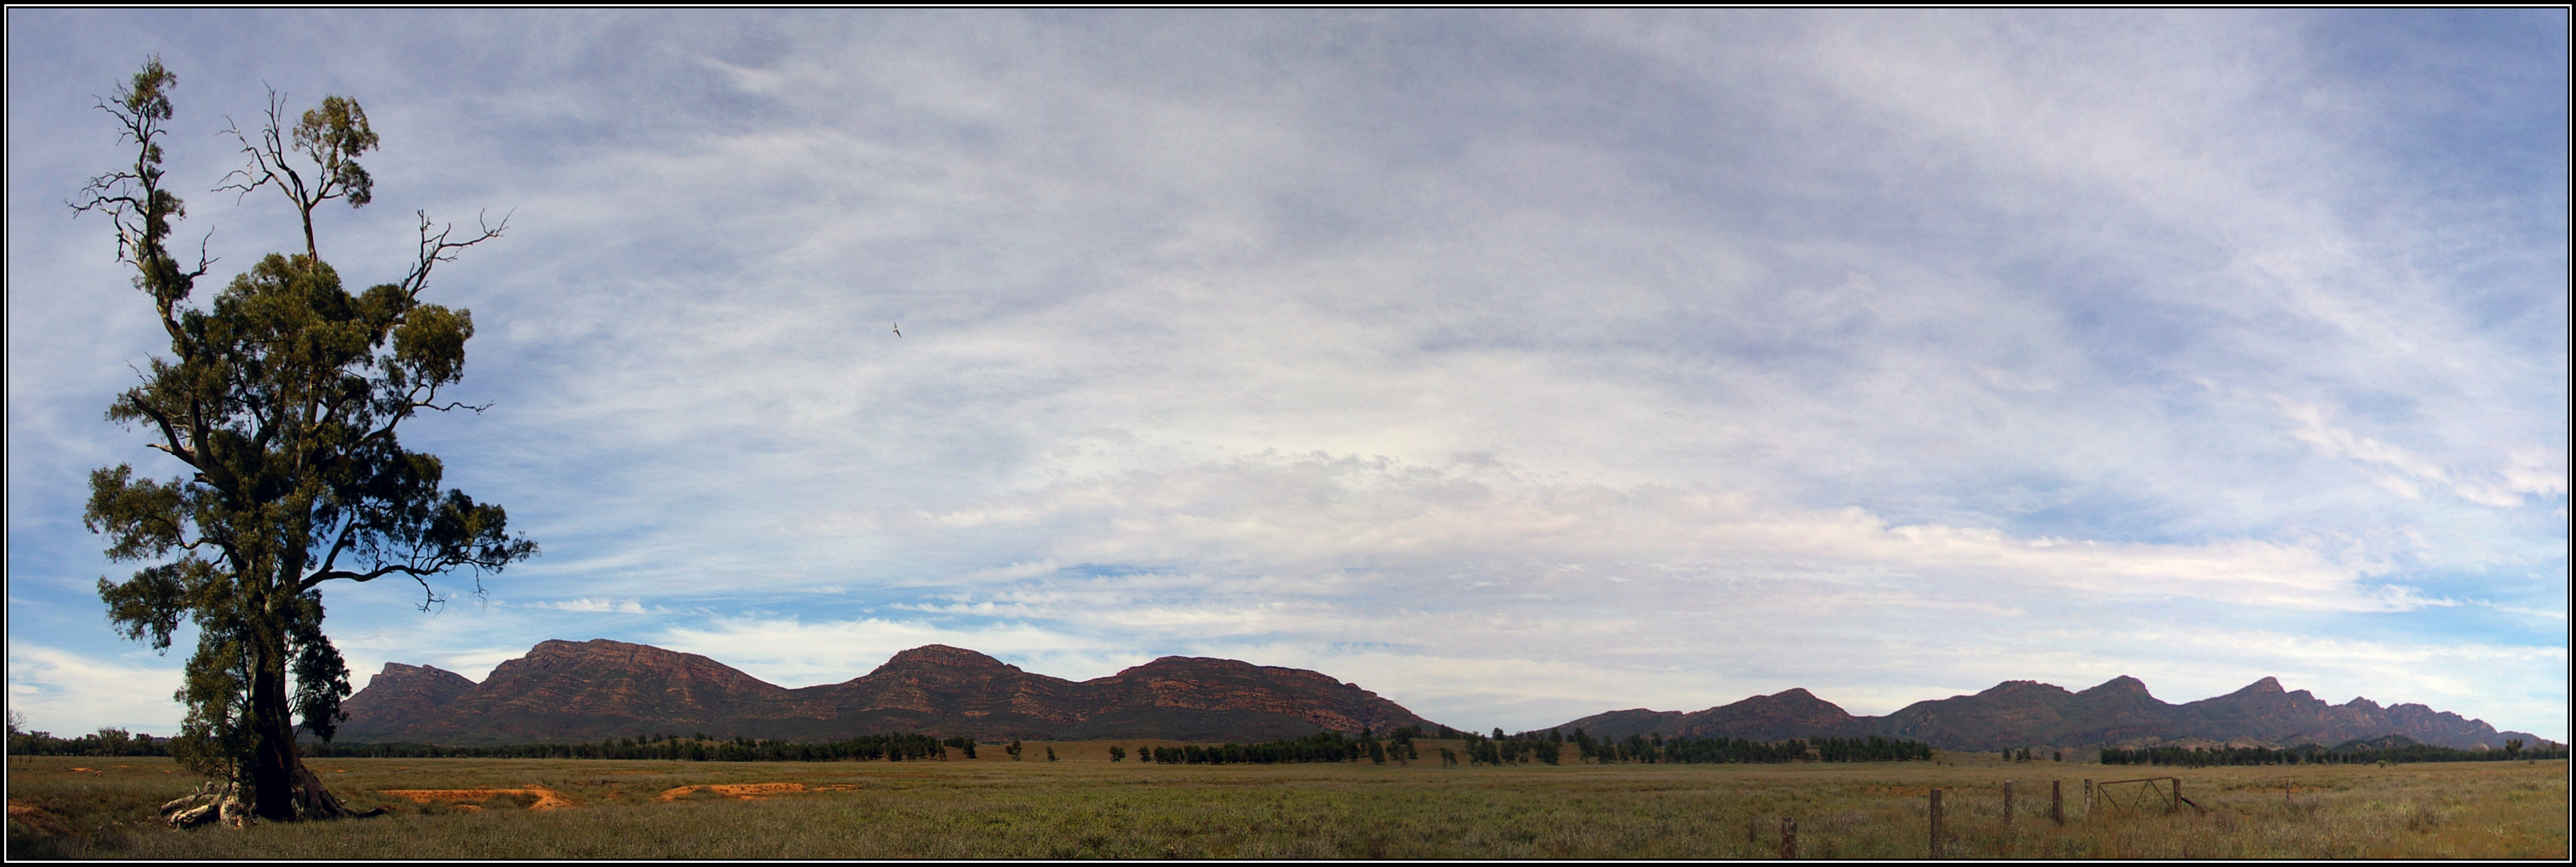 File Panorama Showing The Cazneaux Tree With Wilpena Pound In